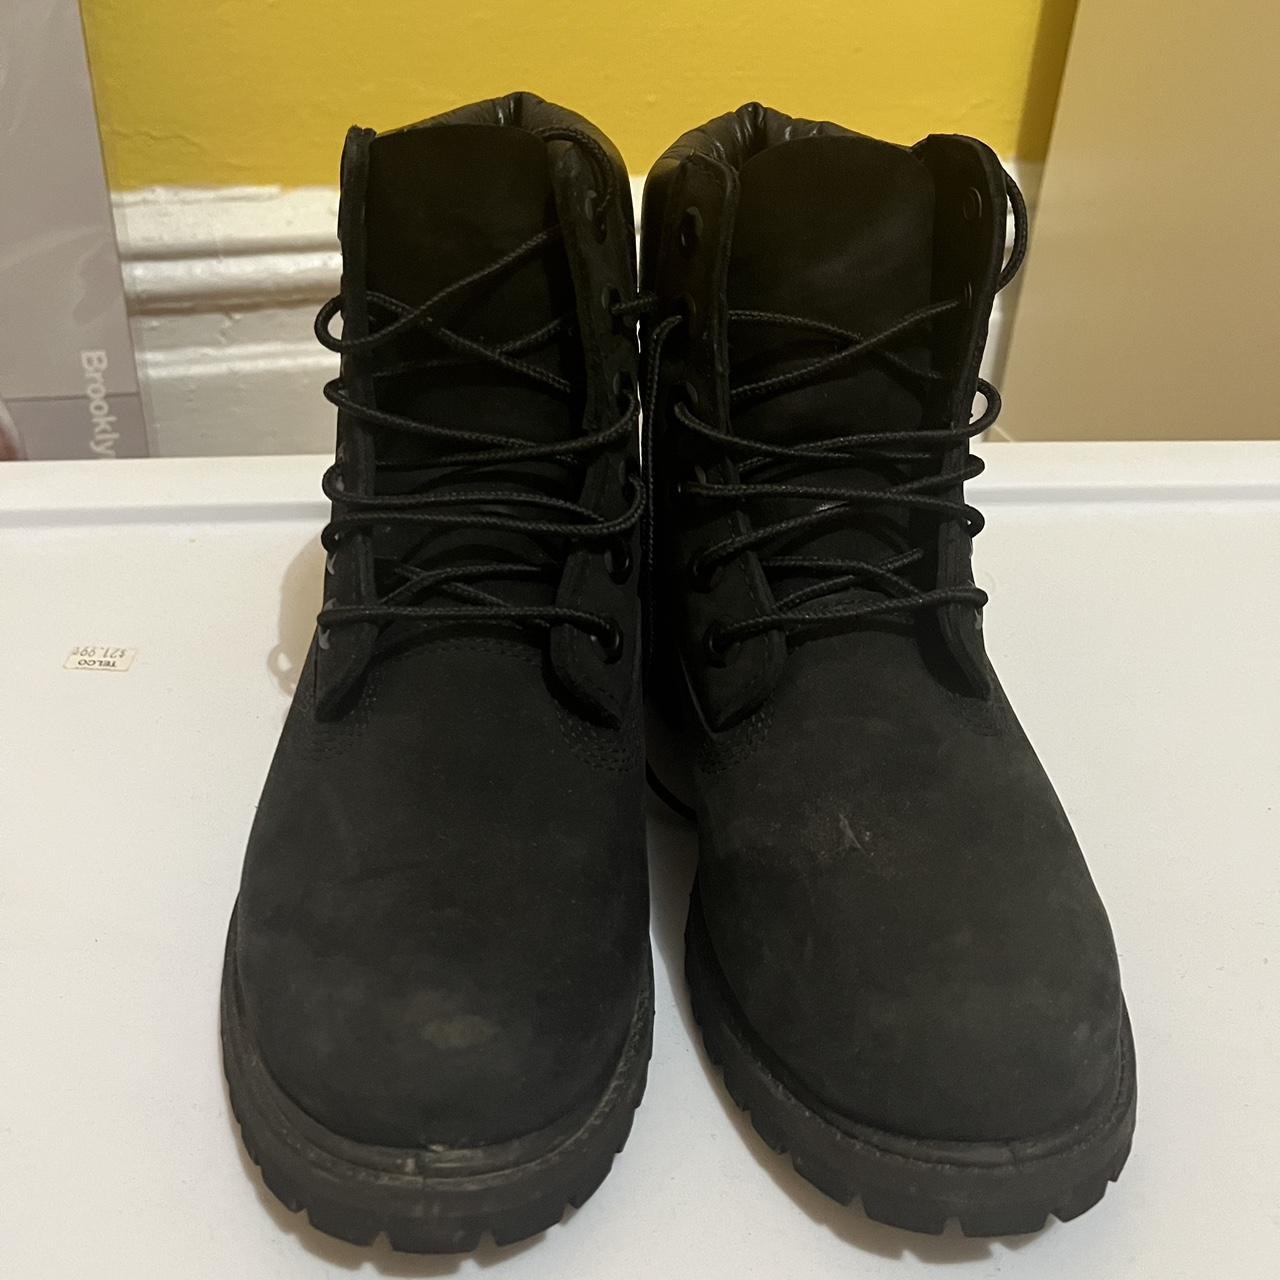 Black timberland boots Timberland boots In good... - Depop